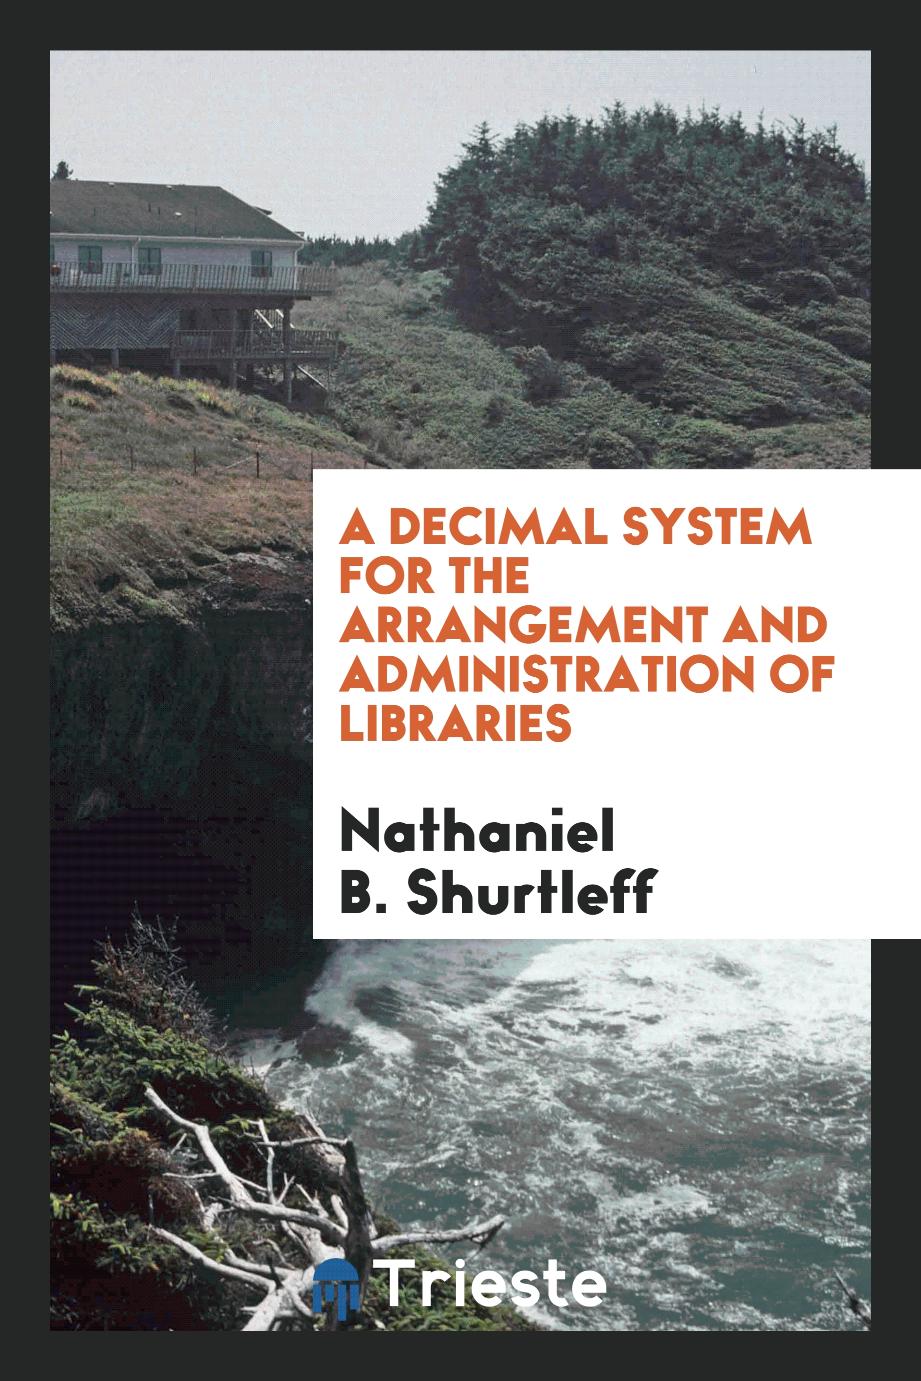 A decimal system for the arrangement and administration of libraries